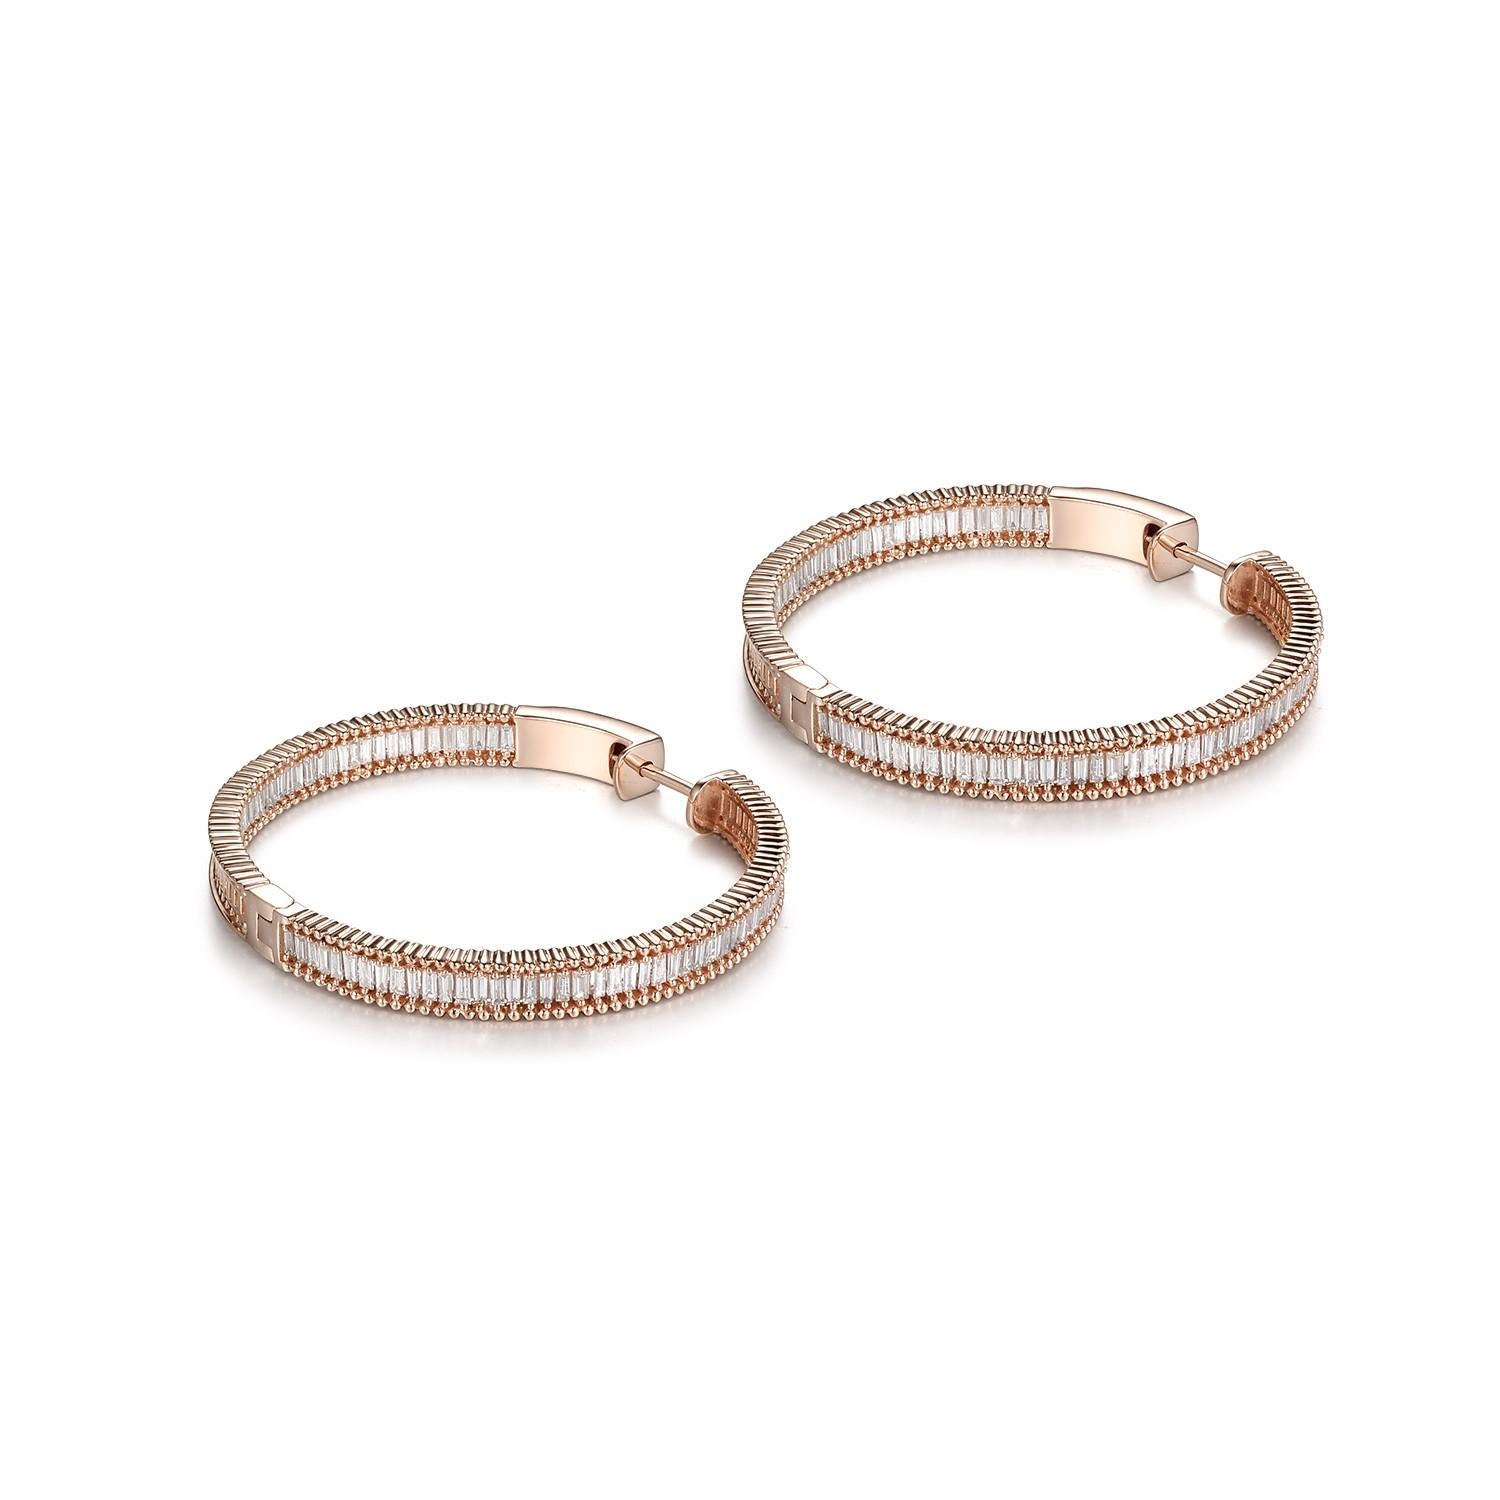 This hoop earrings feature 1.43 carat of taper diamonds. Earrings are set in 18 karat rose gold. The back of the earrings use a push clasp setting to ensure the safety of the earrings. 
Diameter 25.46 mm
Width 4.13 mm
Taper Diamonds 1.43 carat 
18